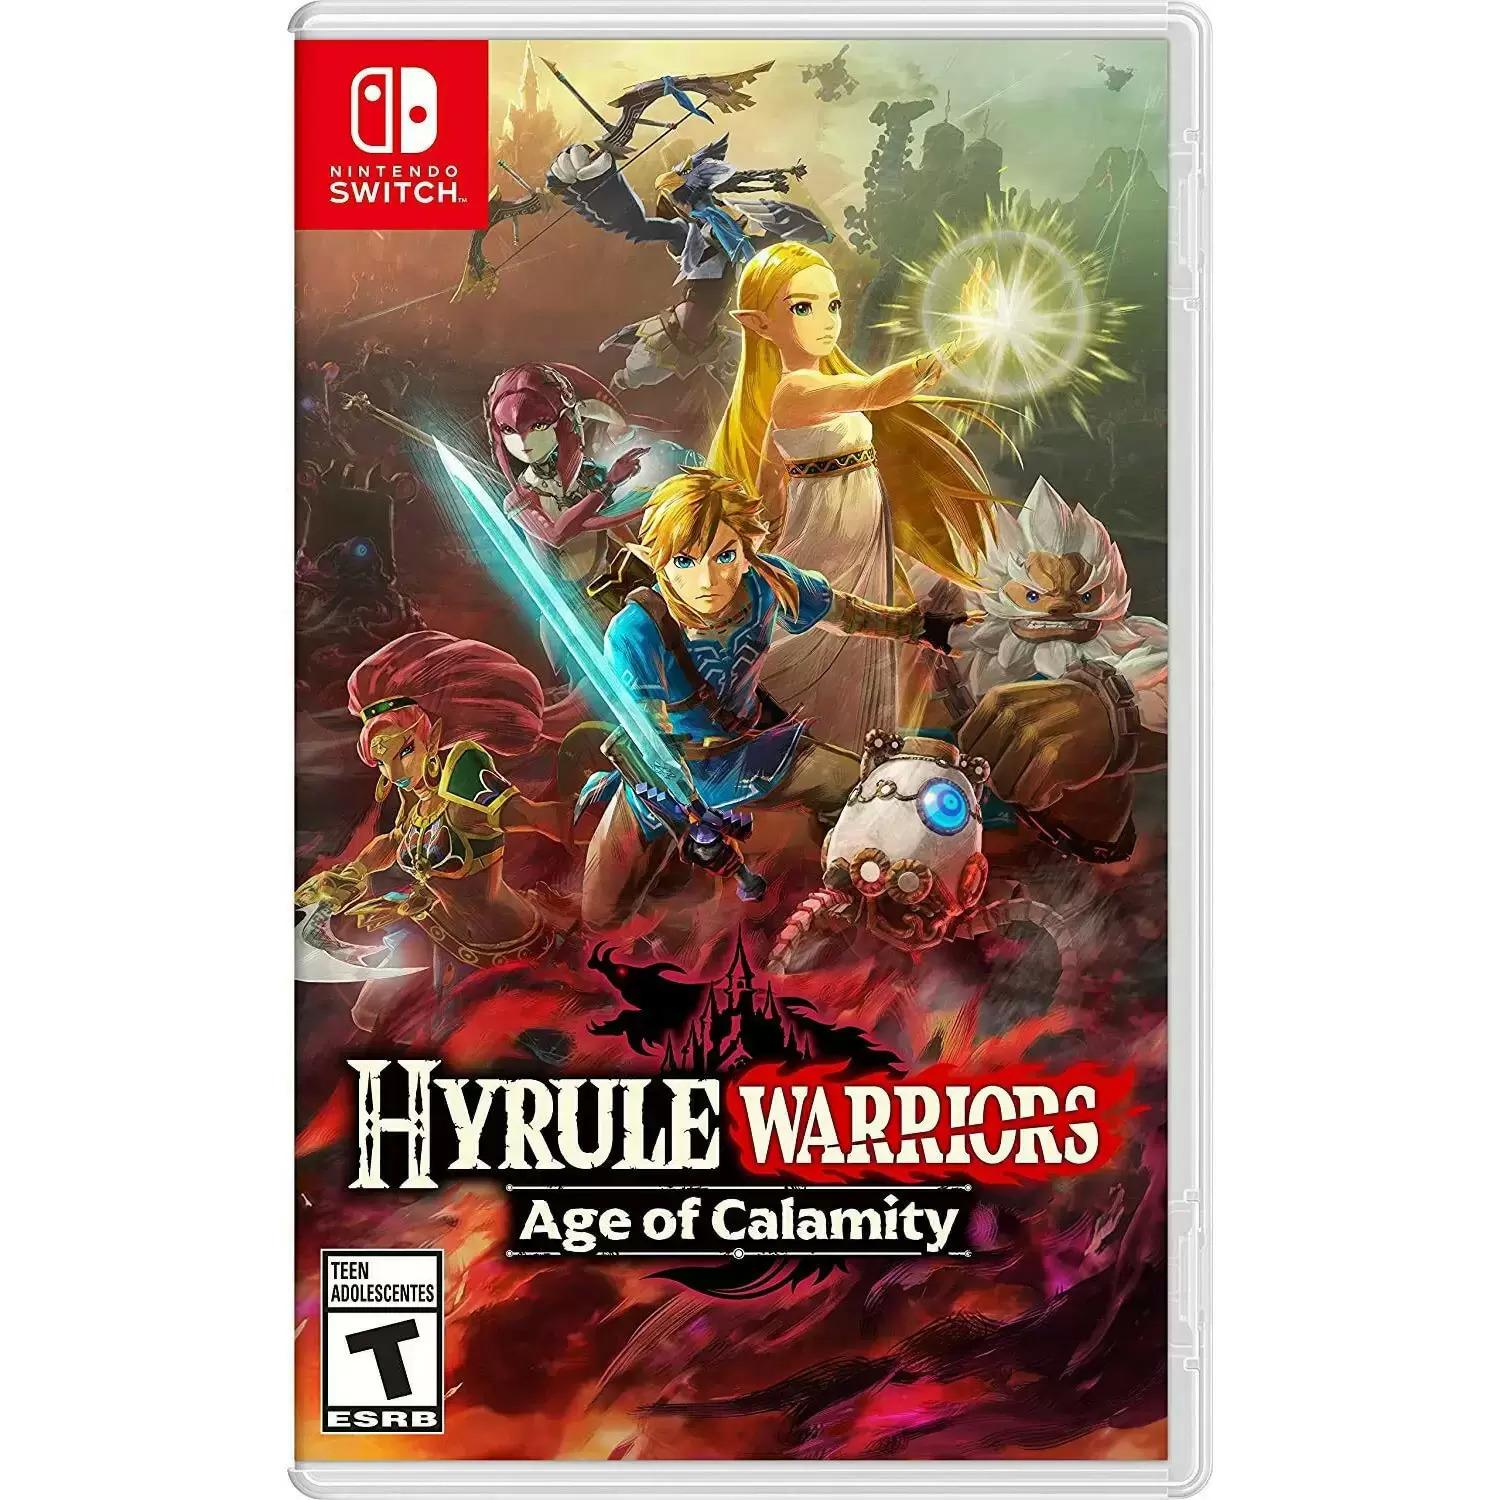 Hyrule Warriors Age of Calamity Nintendo Switch for $29.99 Shipped